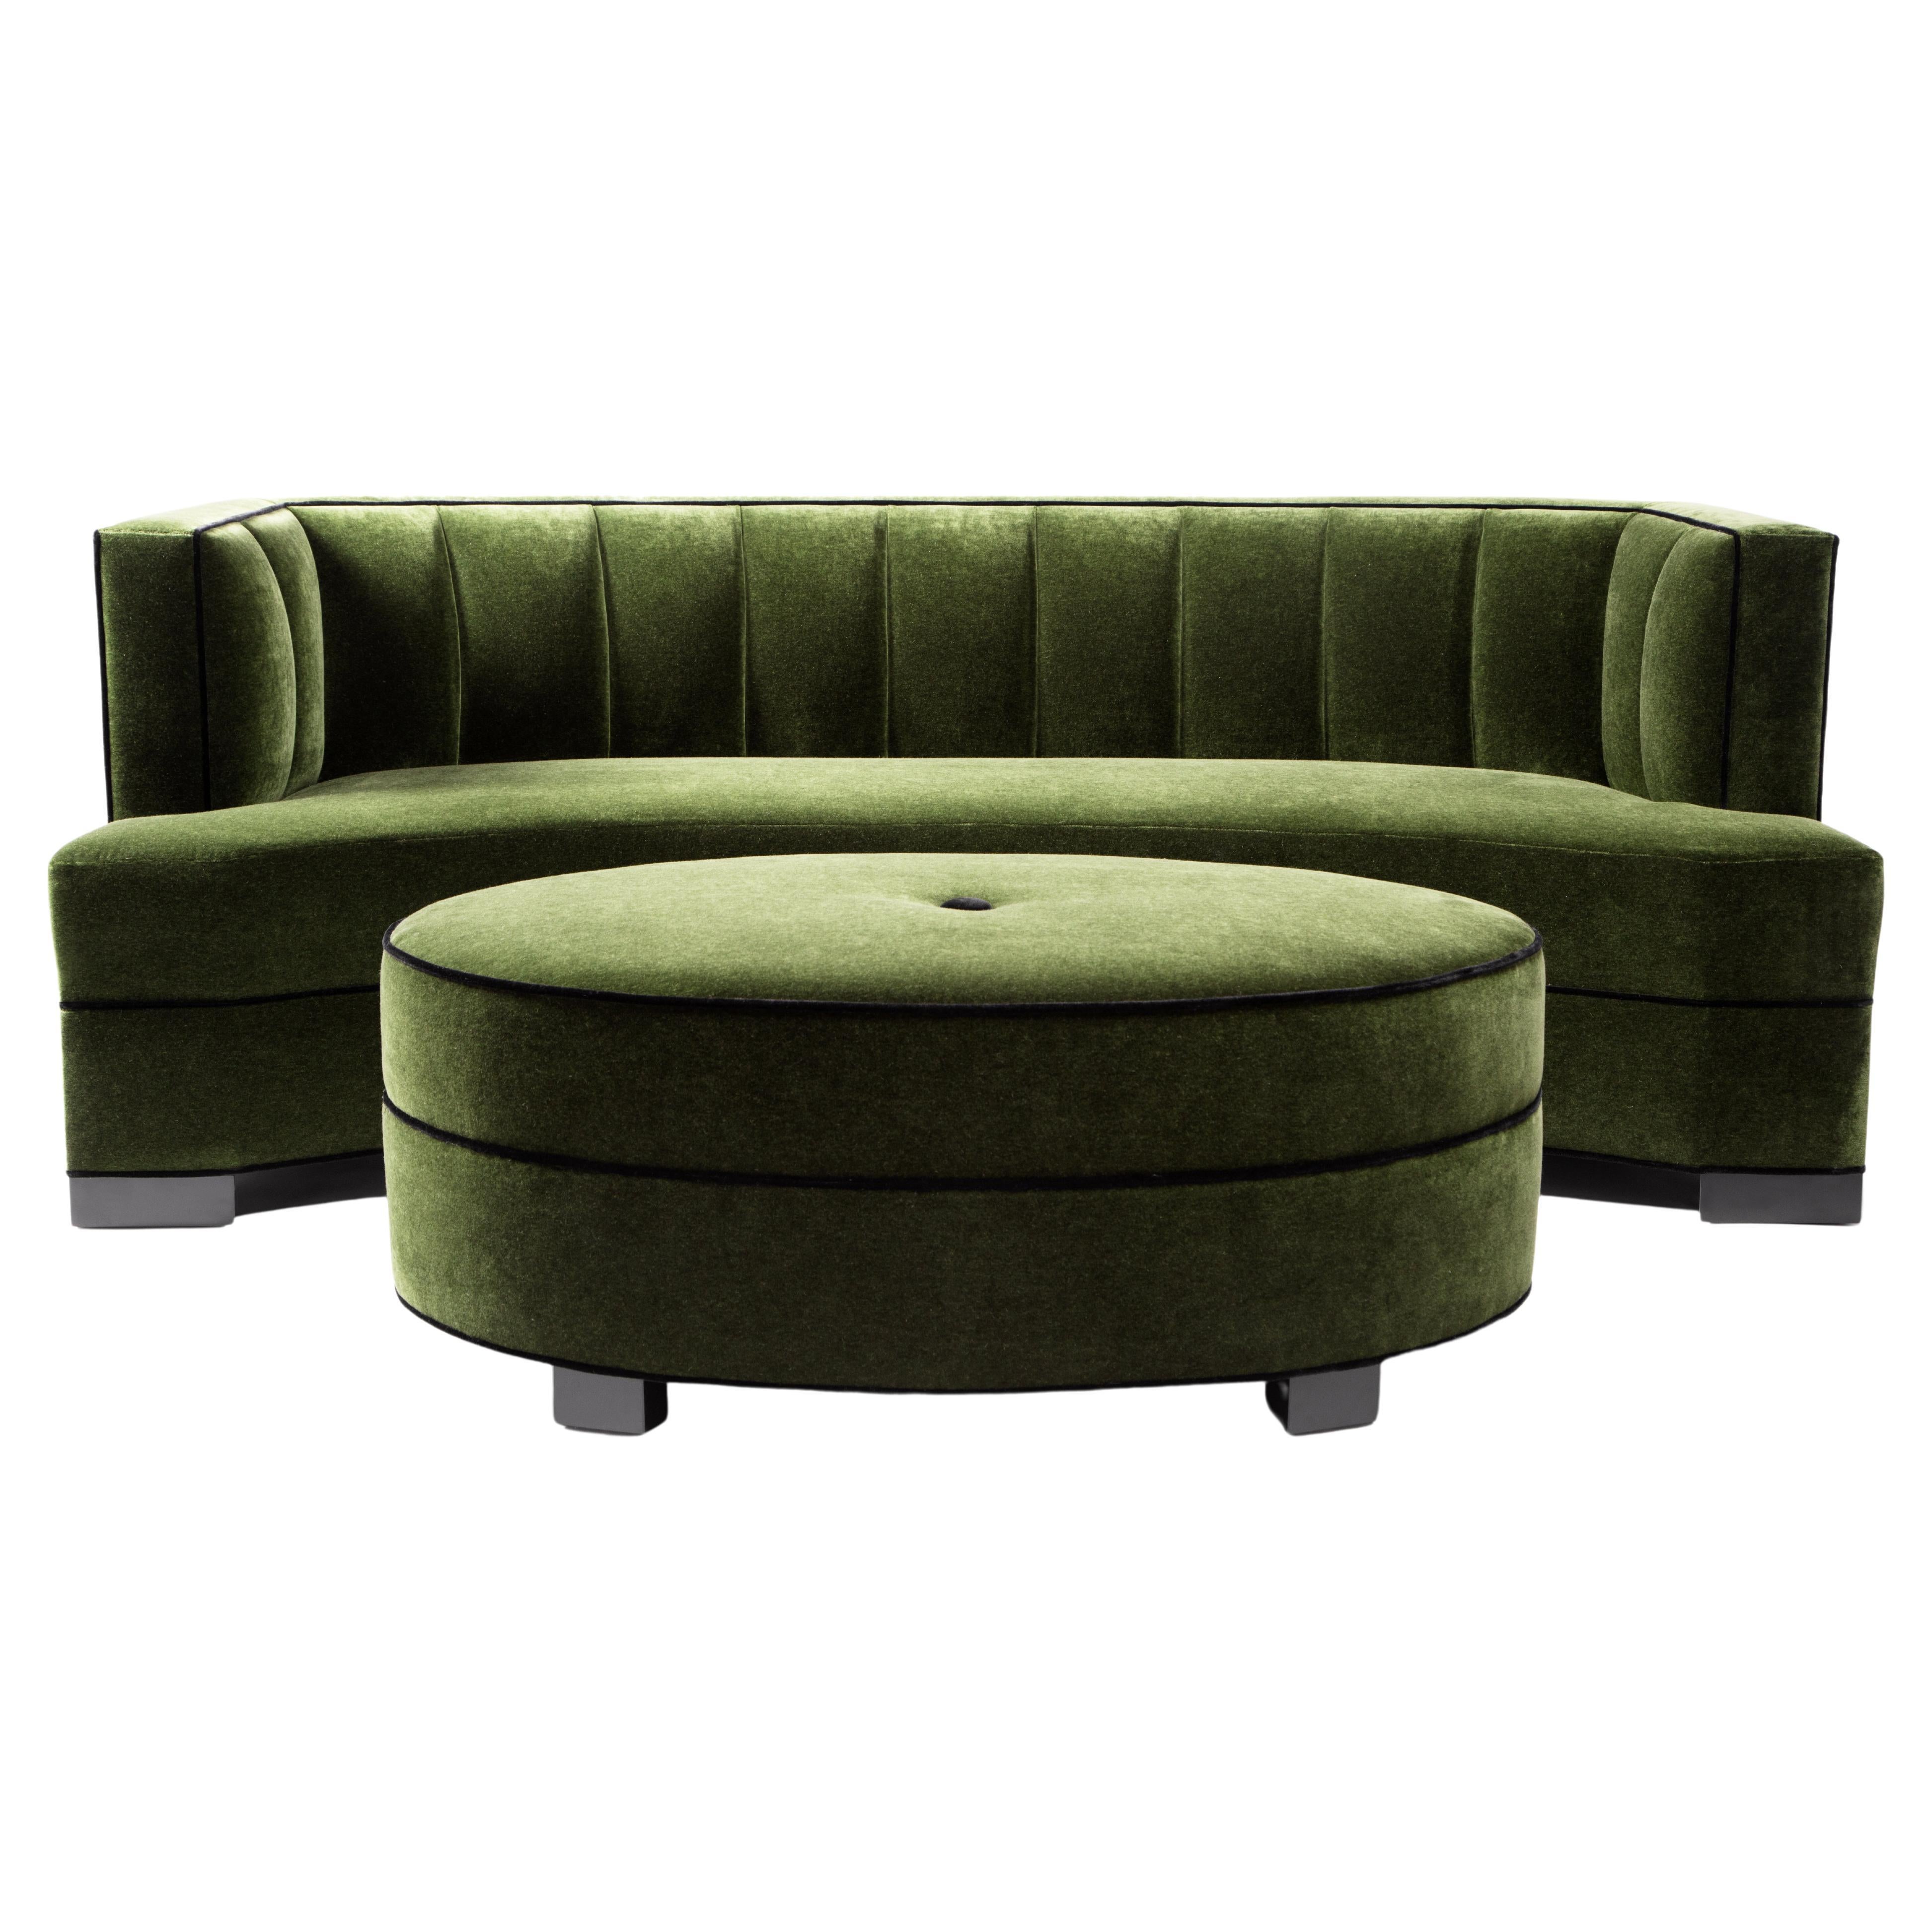 The Alessandra ottoman is best supporting actress to the Alessandra sofa. Her unique oval shape and rich fabric & leather choices make her stand out from the crowd. 

Shown in emerald mohair with custom contrast welt and black satin leg finish. 